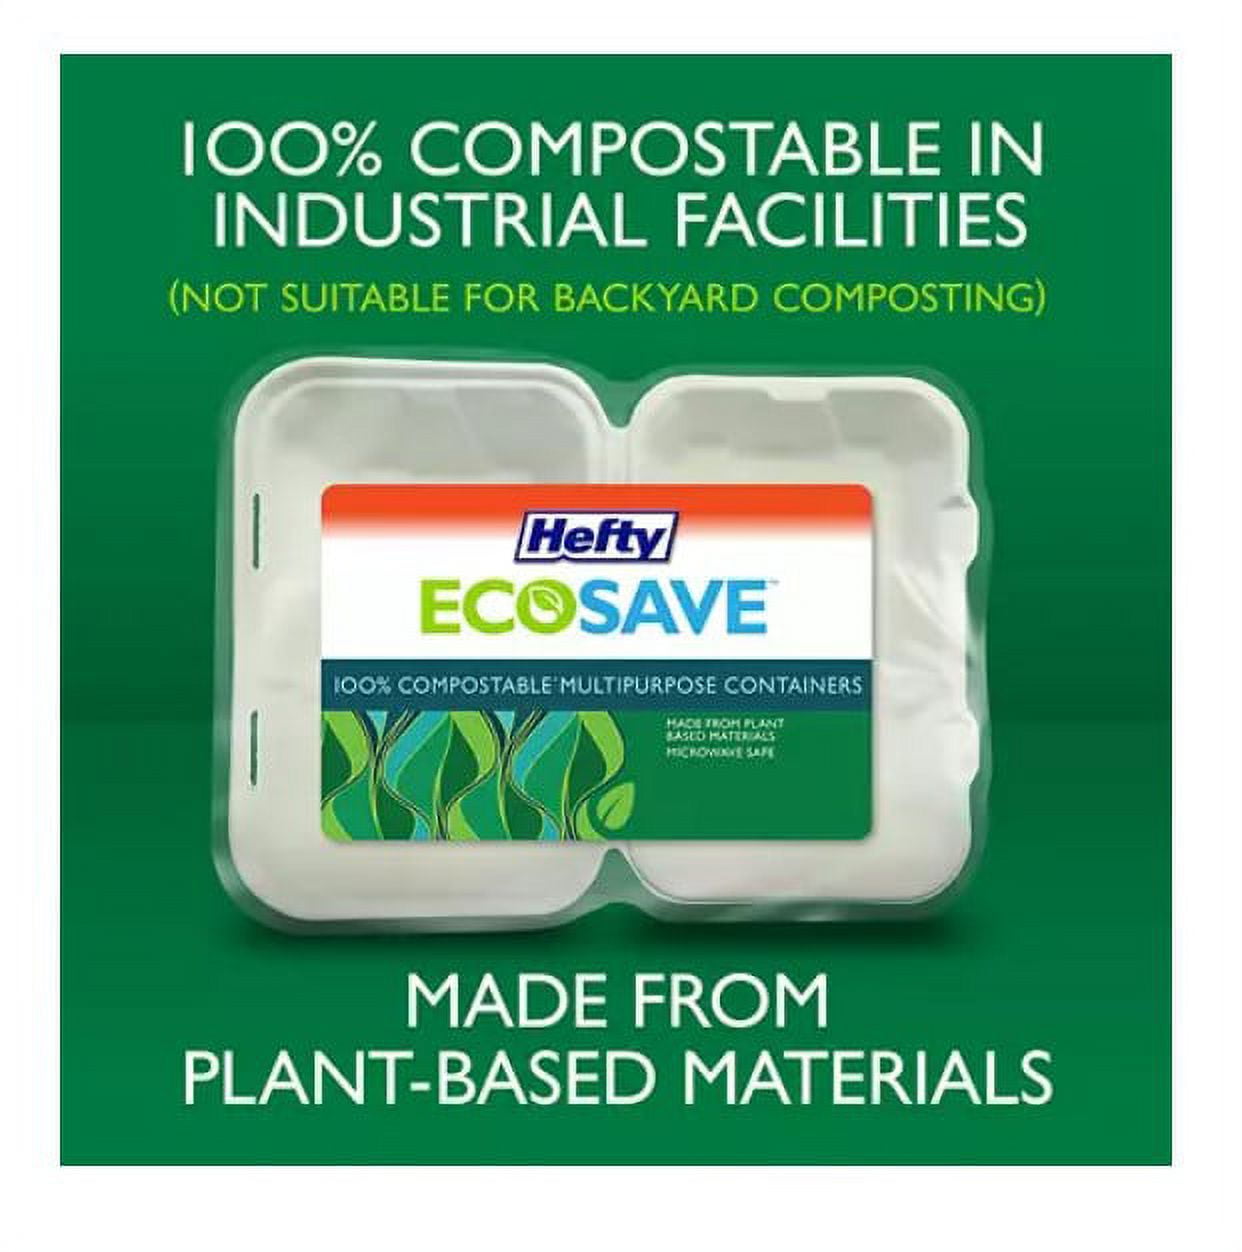 Hefty ECOSAVE™ – Loved by Nature 